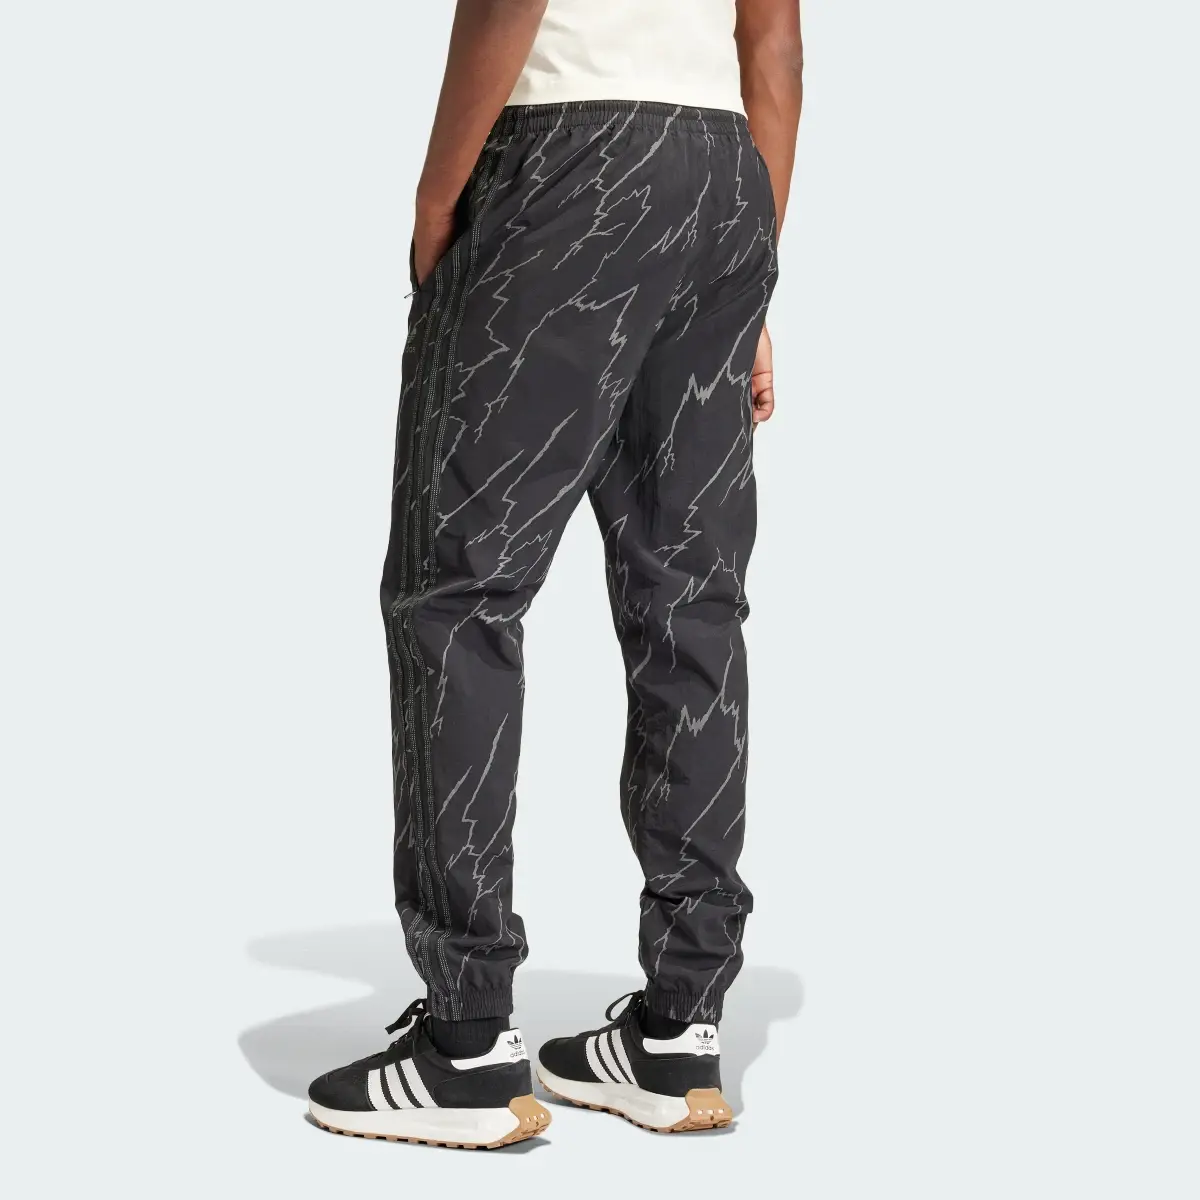 Adidas Allover Print SST Track Tracksuit Bottoms. 3